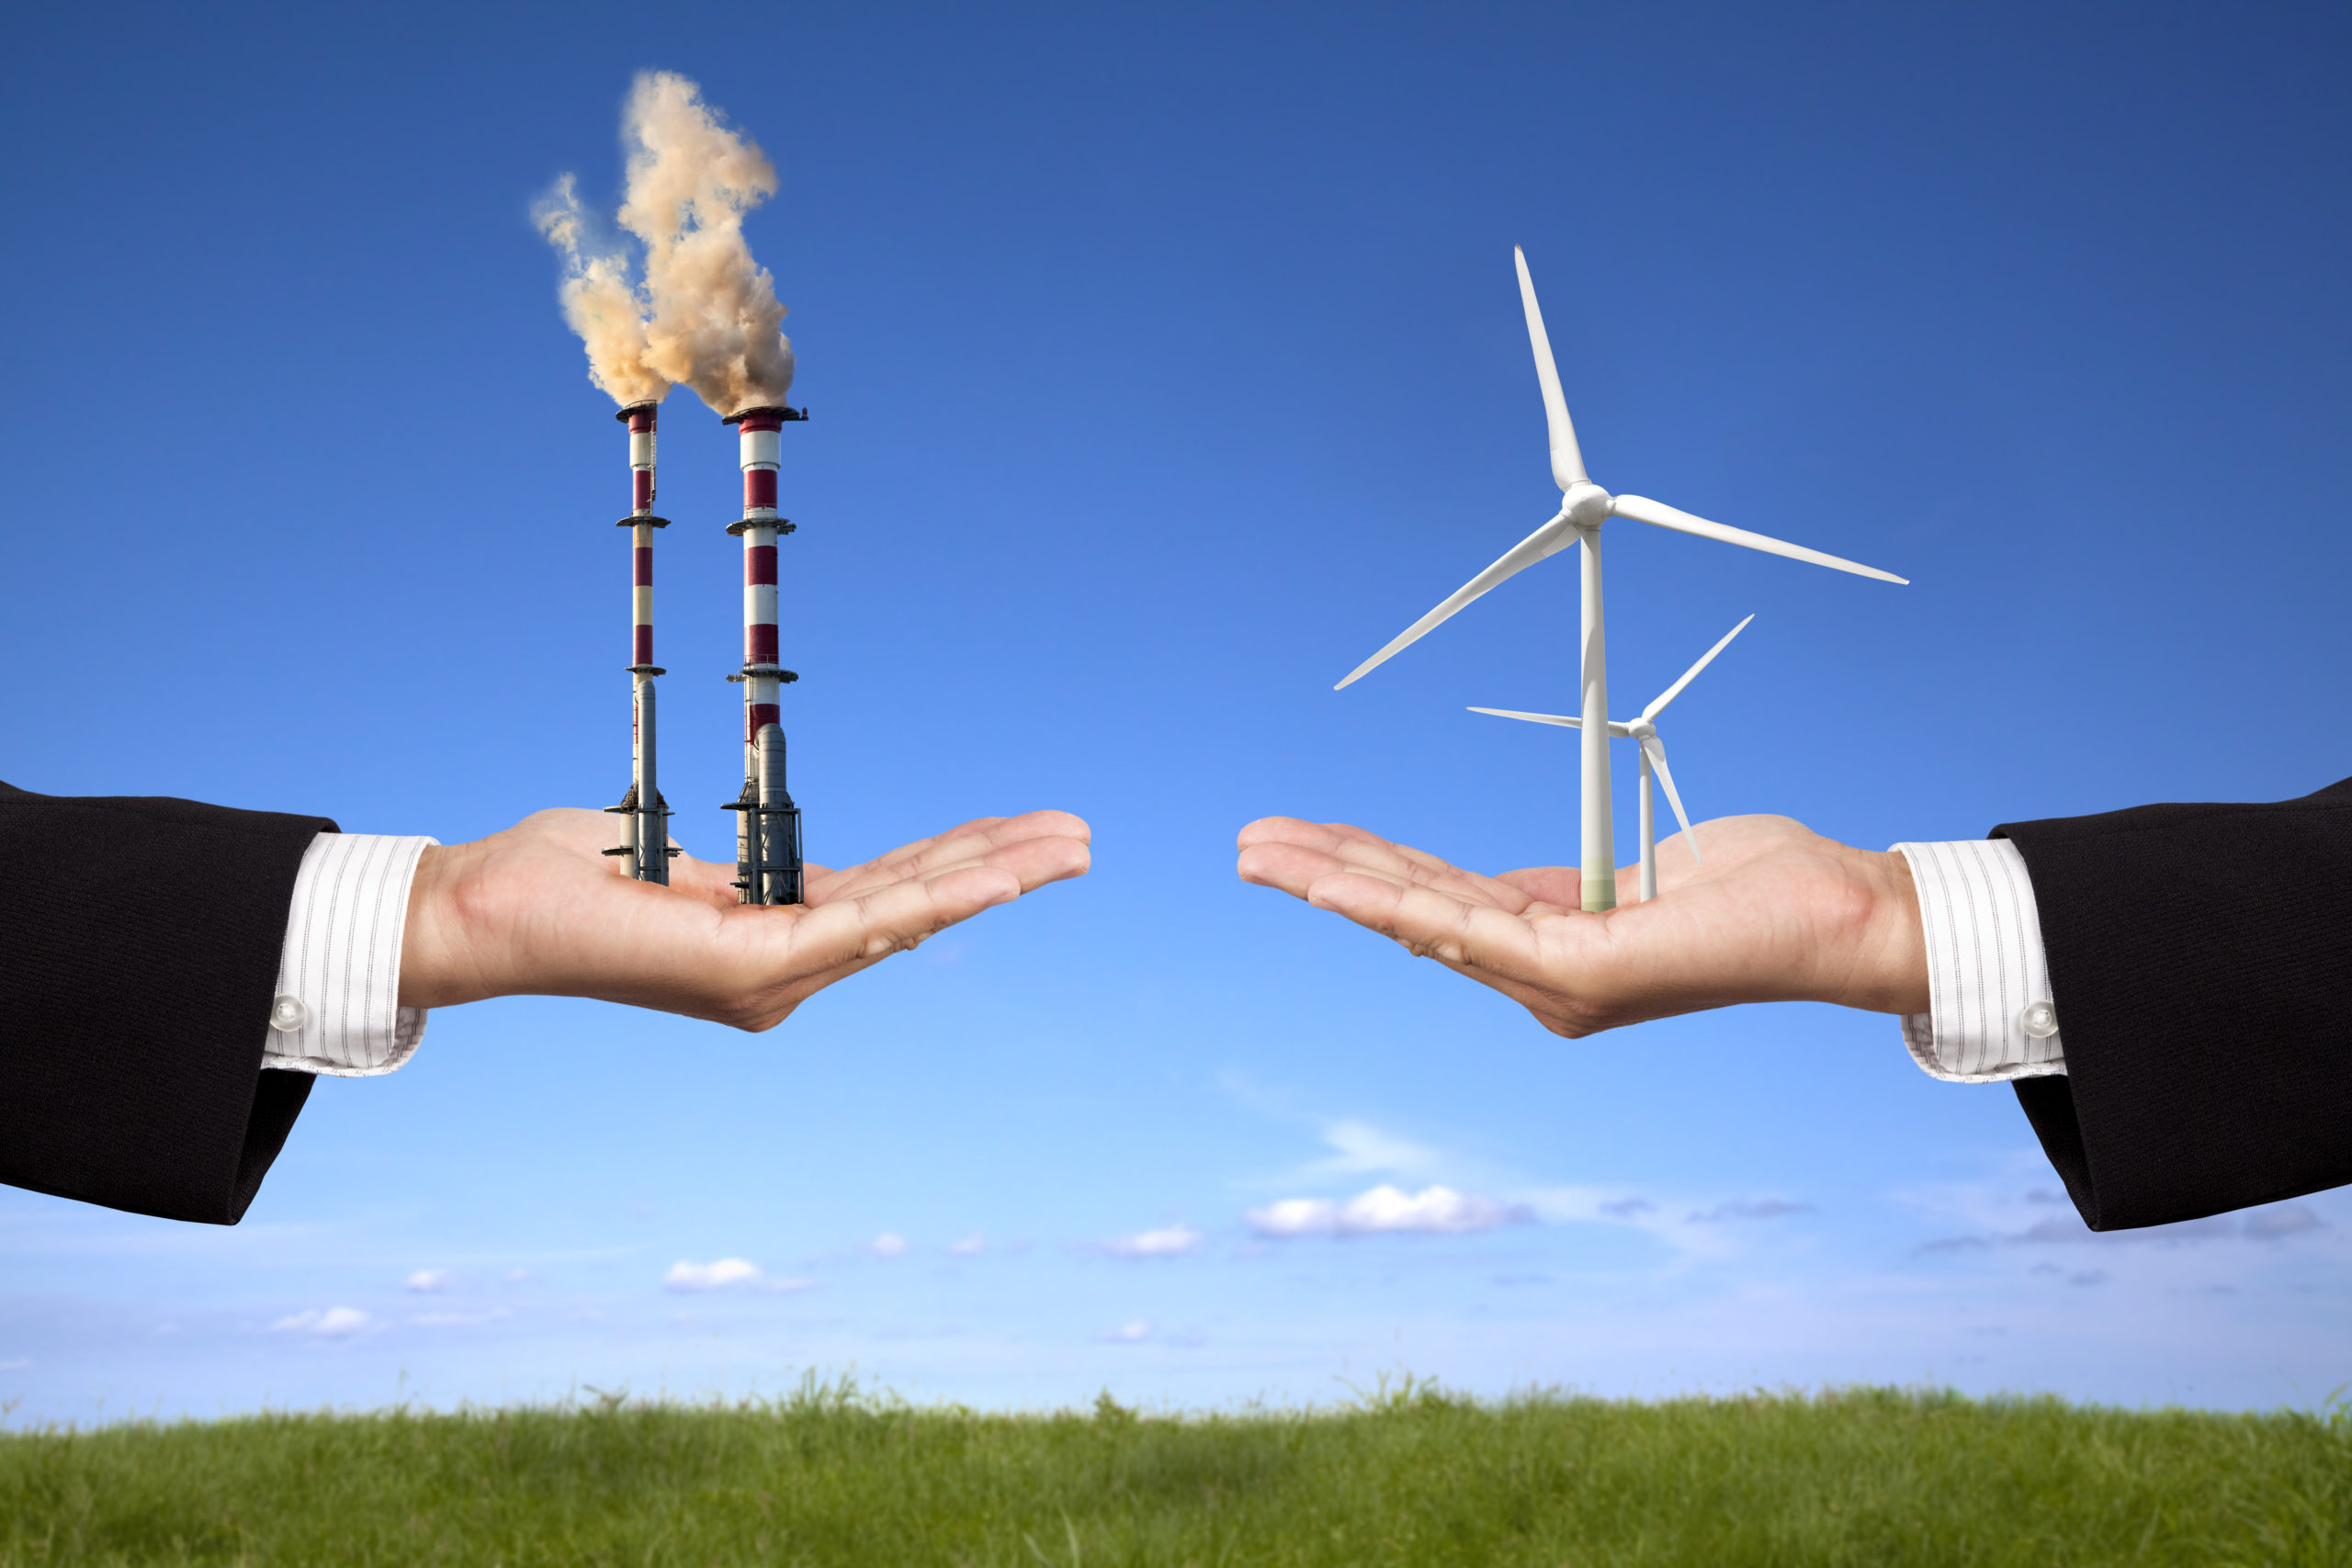 www.ipwatchdog.com: The Push for Clean Energy Ignores Economic and Innovation Realities